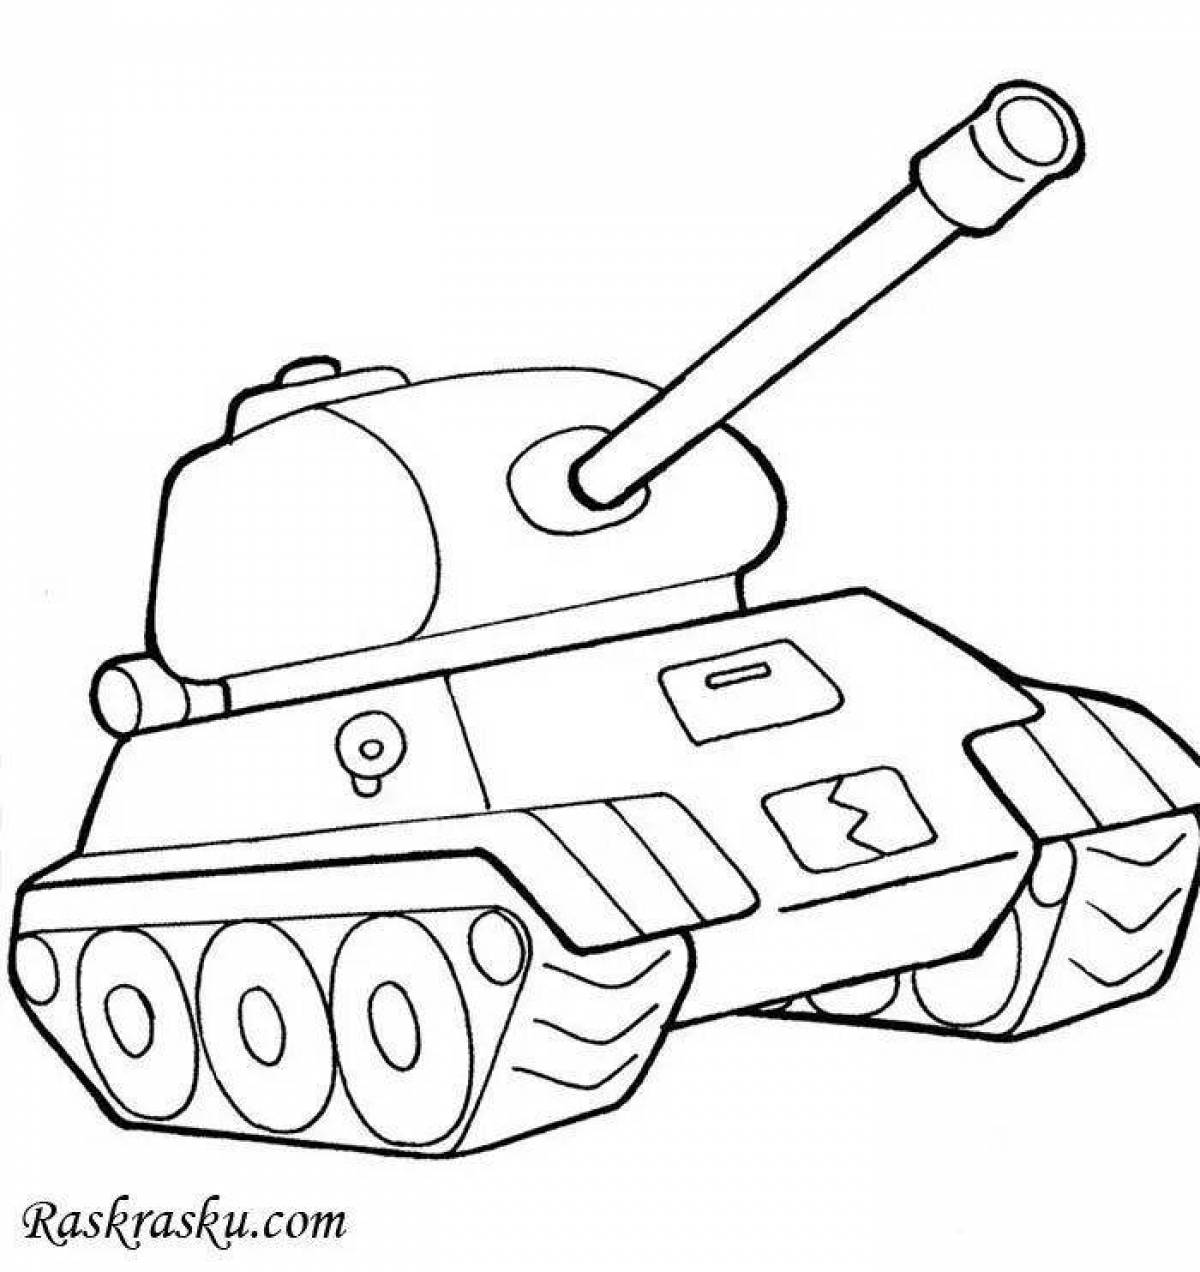 Awesome tank coloring pages for 7 year olds